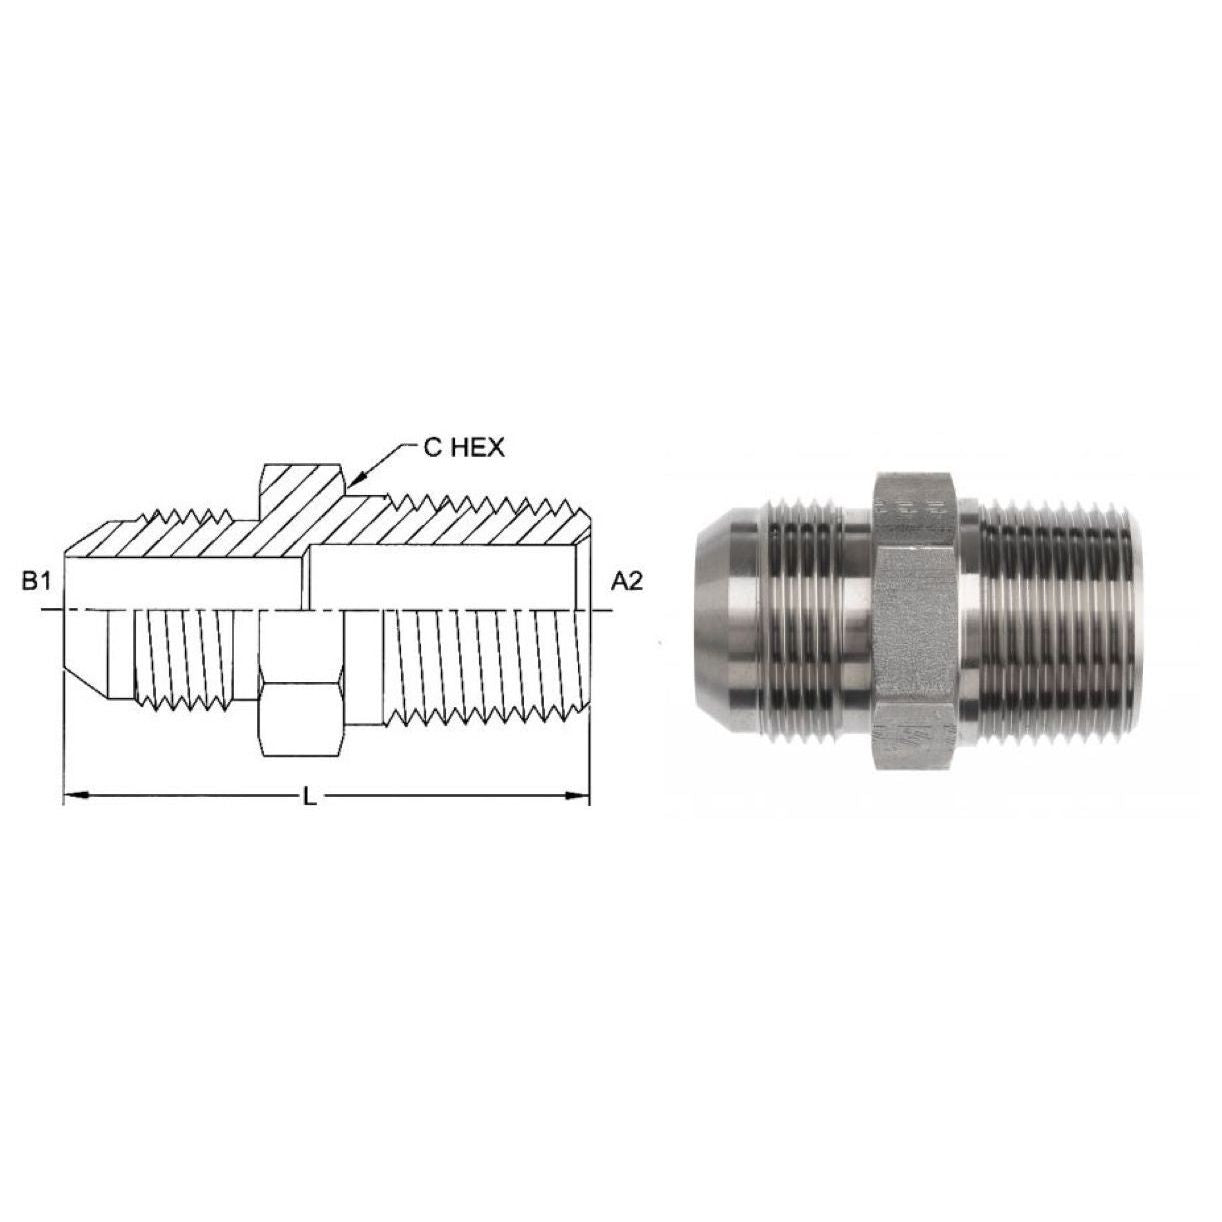 2404-04-04-SS : OneHydraulics Adapter, Straight, 0.25 (1/4") Male NPT x 0.25 (1/4") Male, Stainless Steel, 7200psi